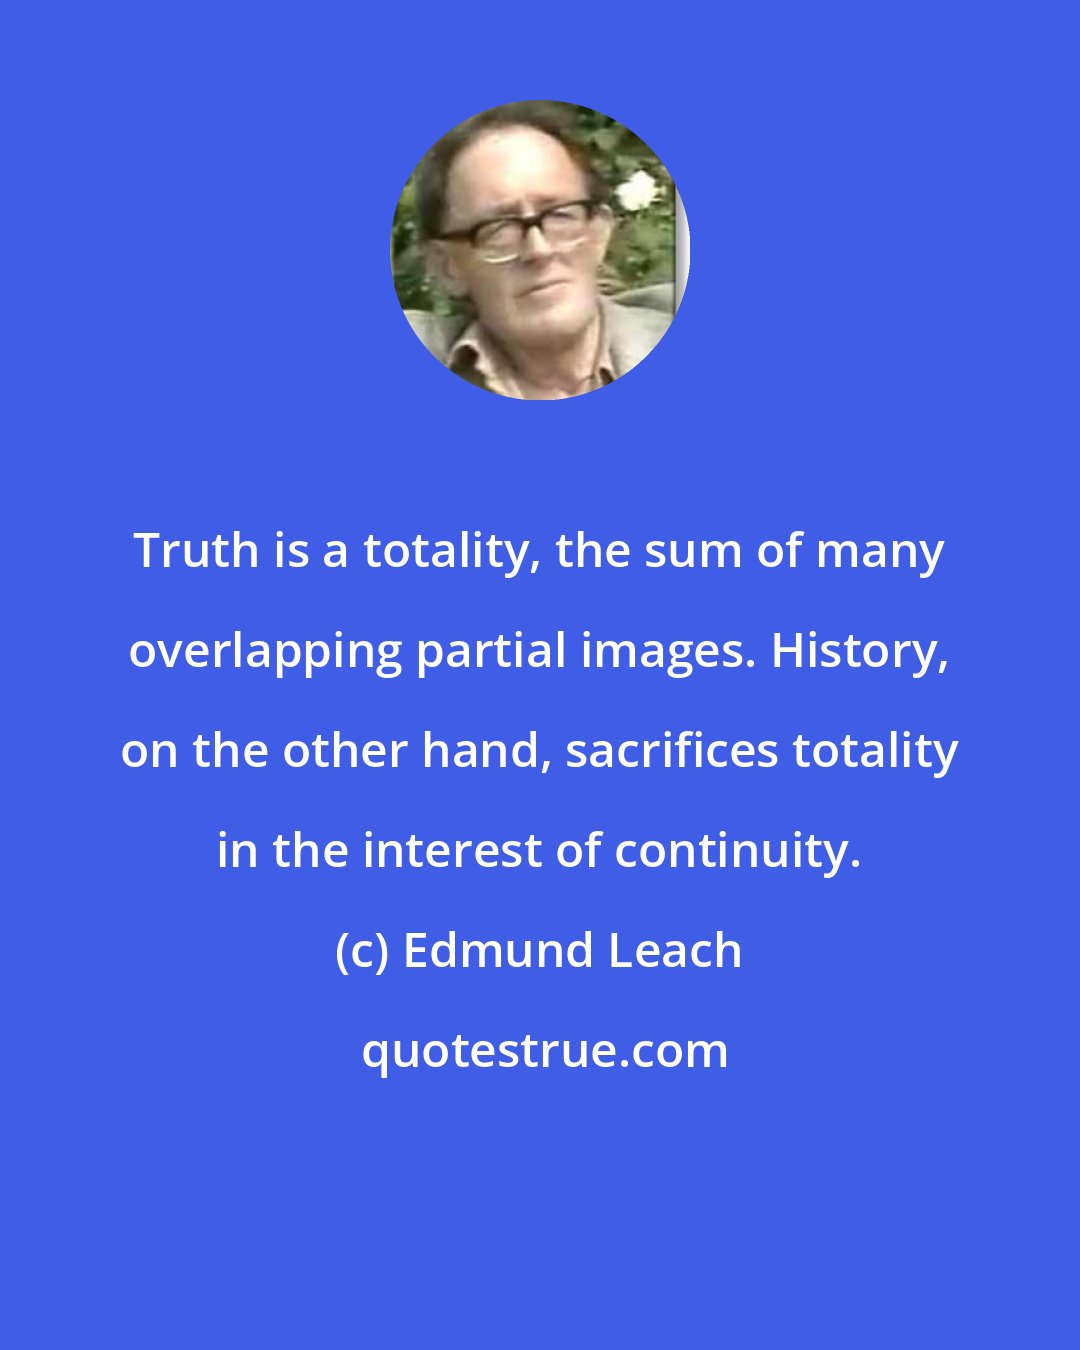 Edmund Leach: Truth is a totality, the sum of many overlapping partial images. History, on the other hand, sacrifices totality in the interest of continuity.